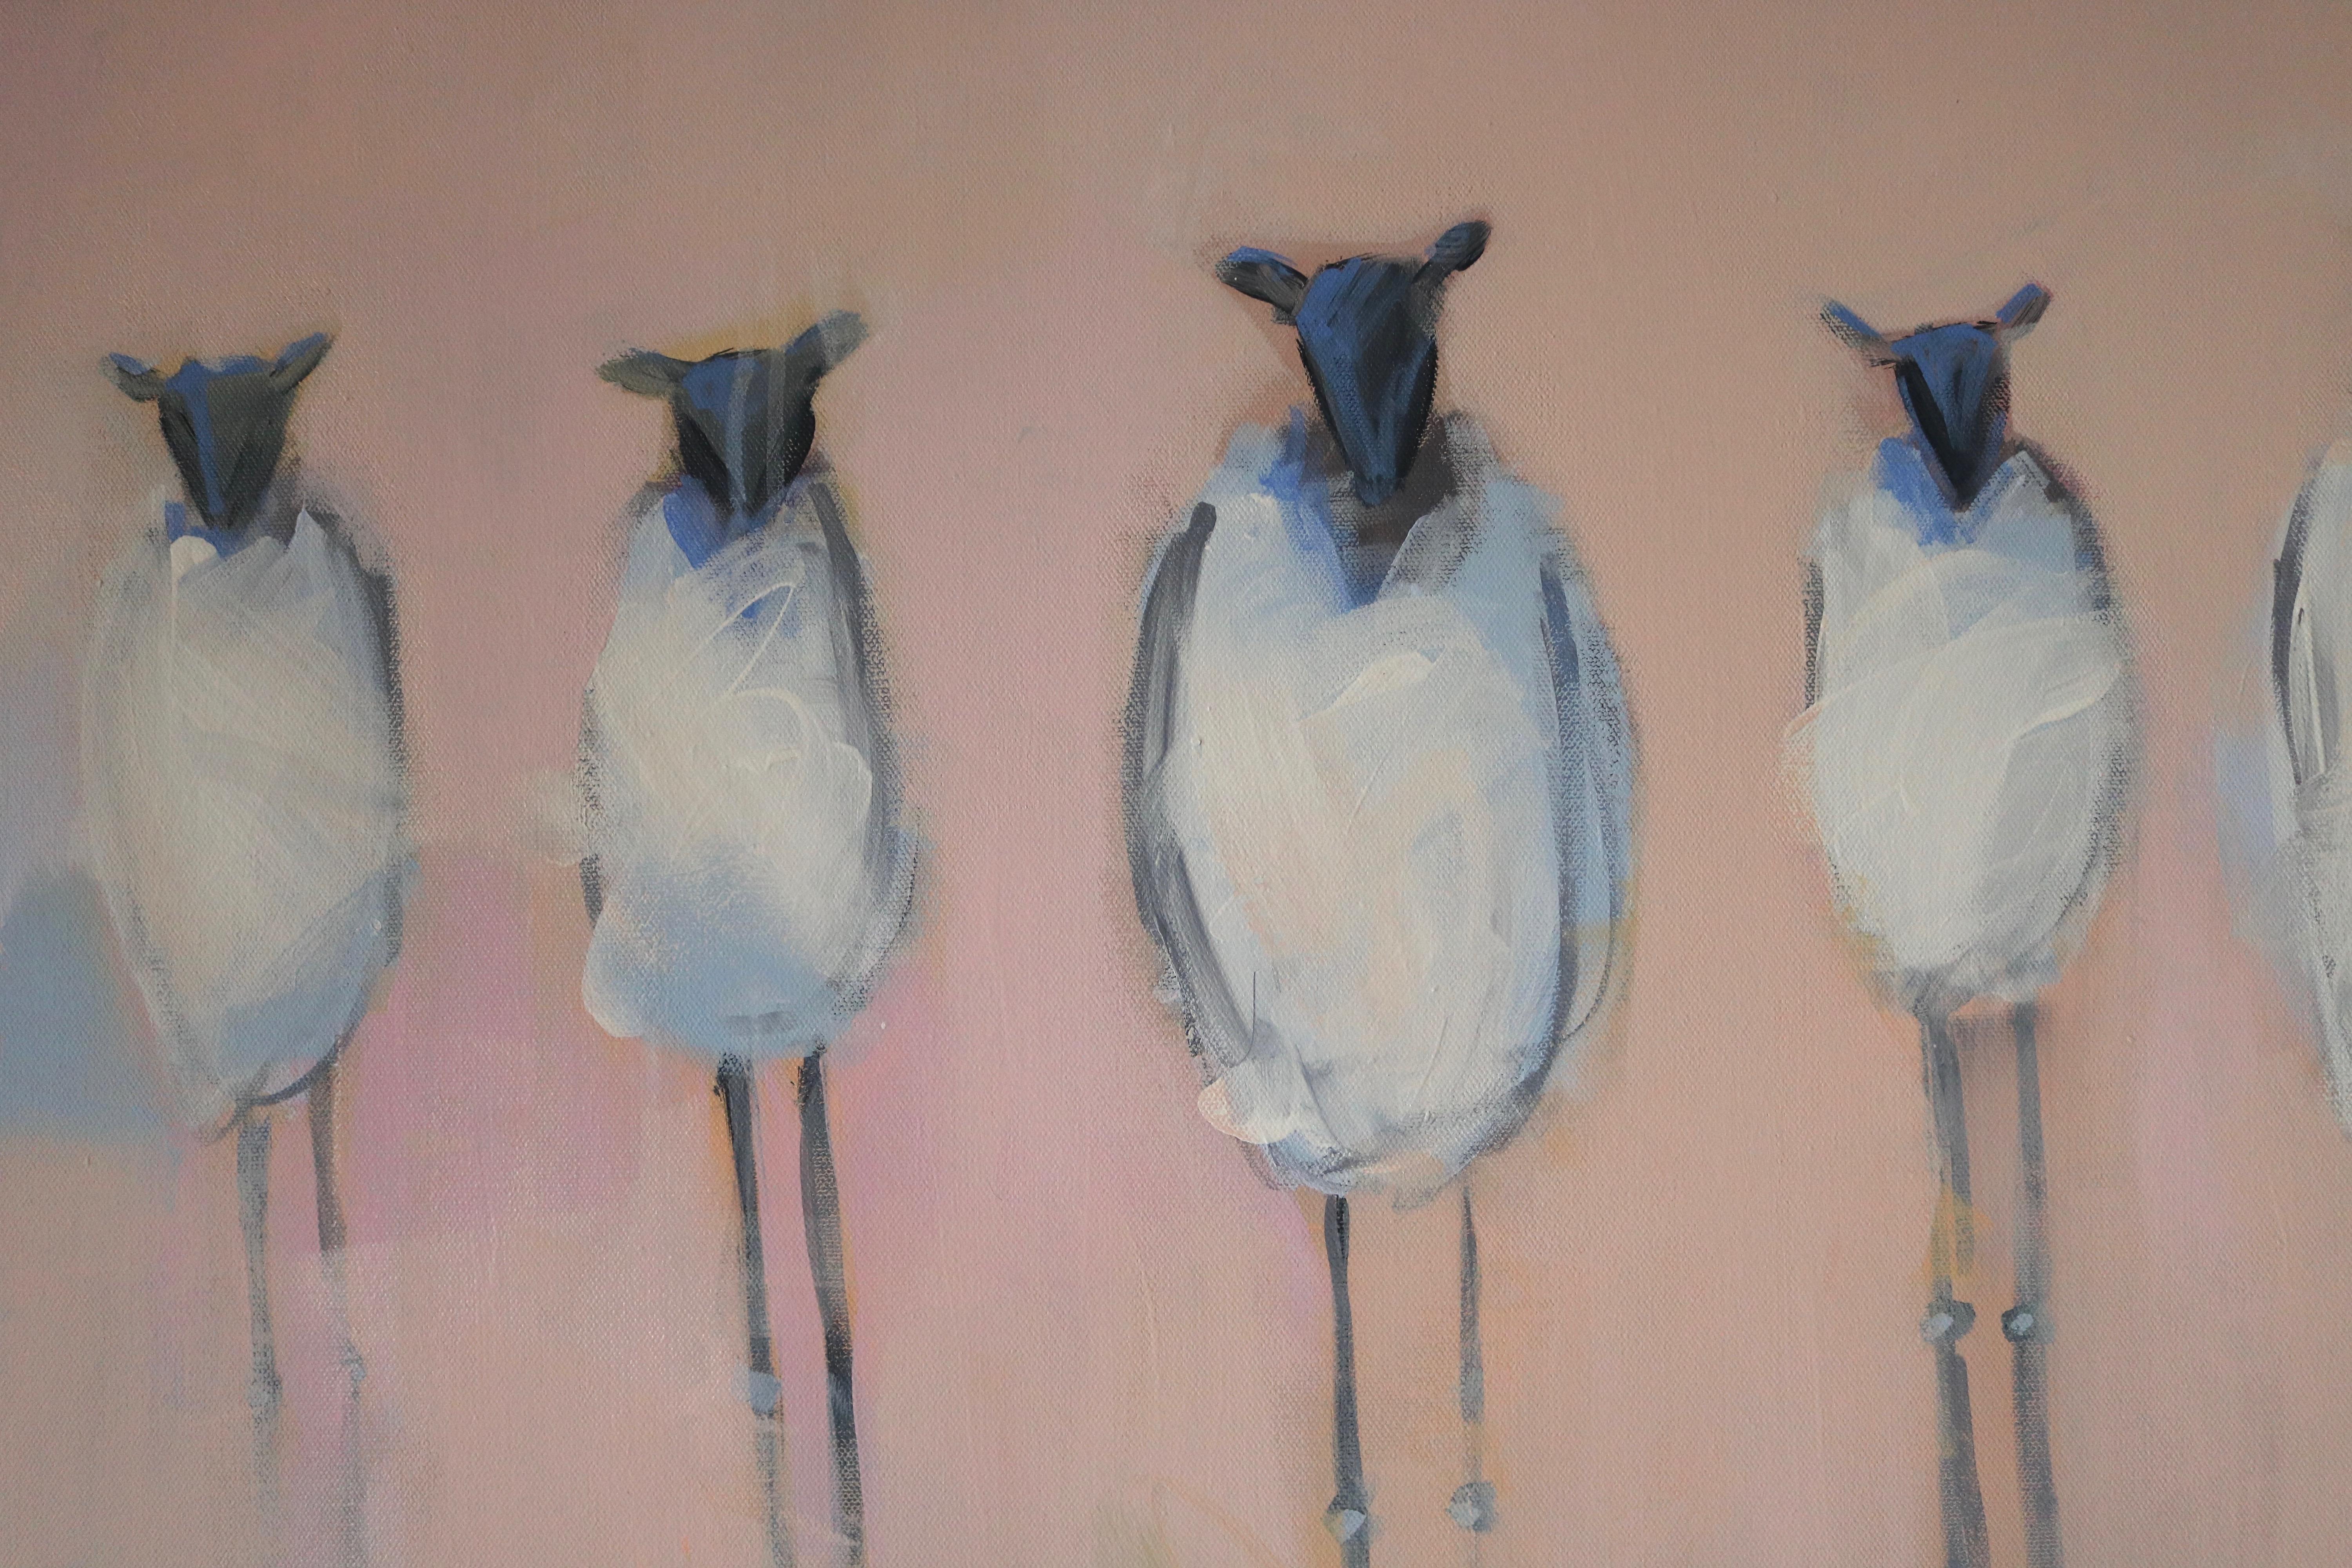 <p>Artist Comments<br />A quintet of white sheep with knobby knees stand together on pink. Part of Lesli DeVito's long running series of sheep, pairing these gentle animals with clever titles to represent human thoughts and groups. Of this painting,